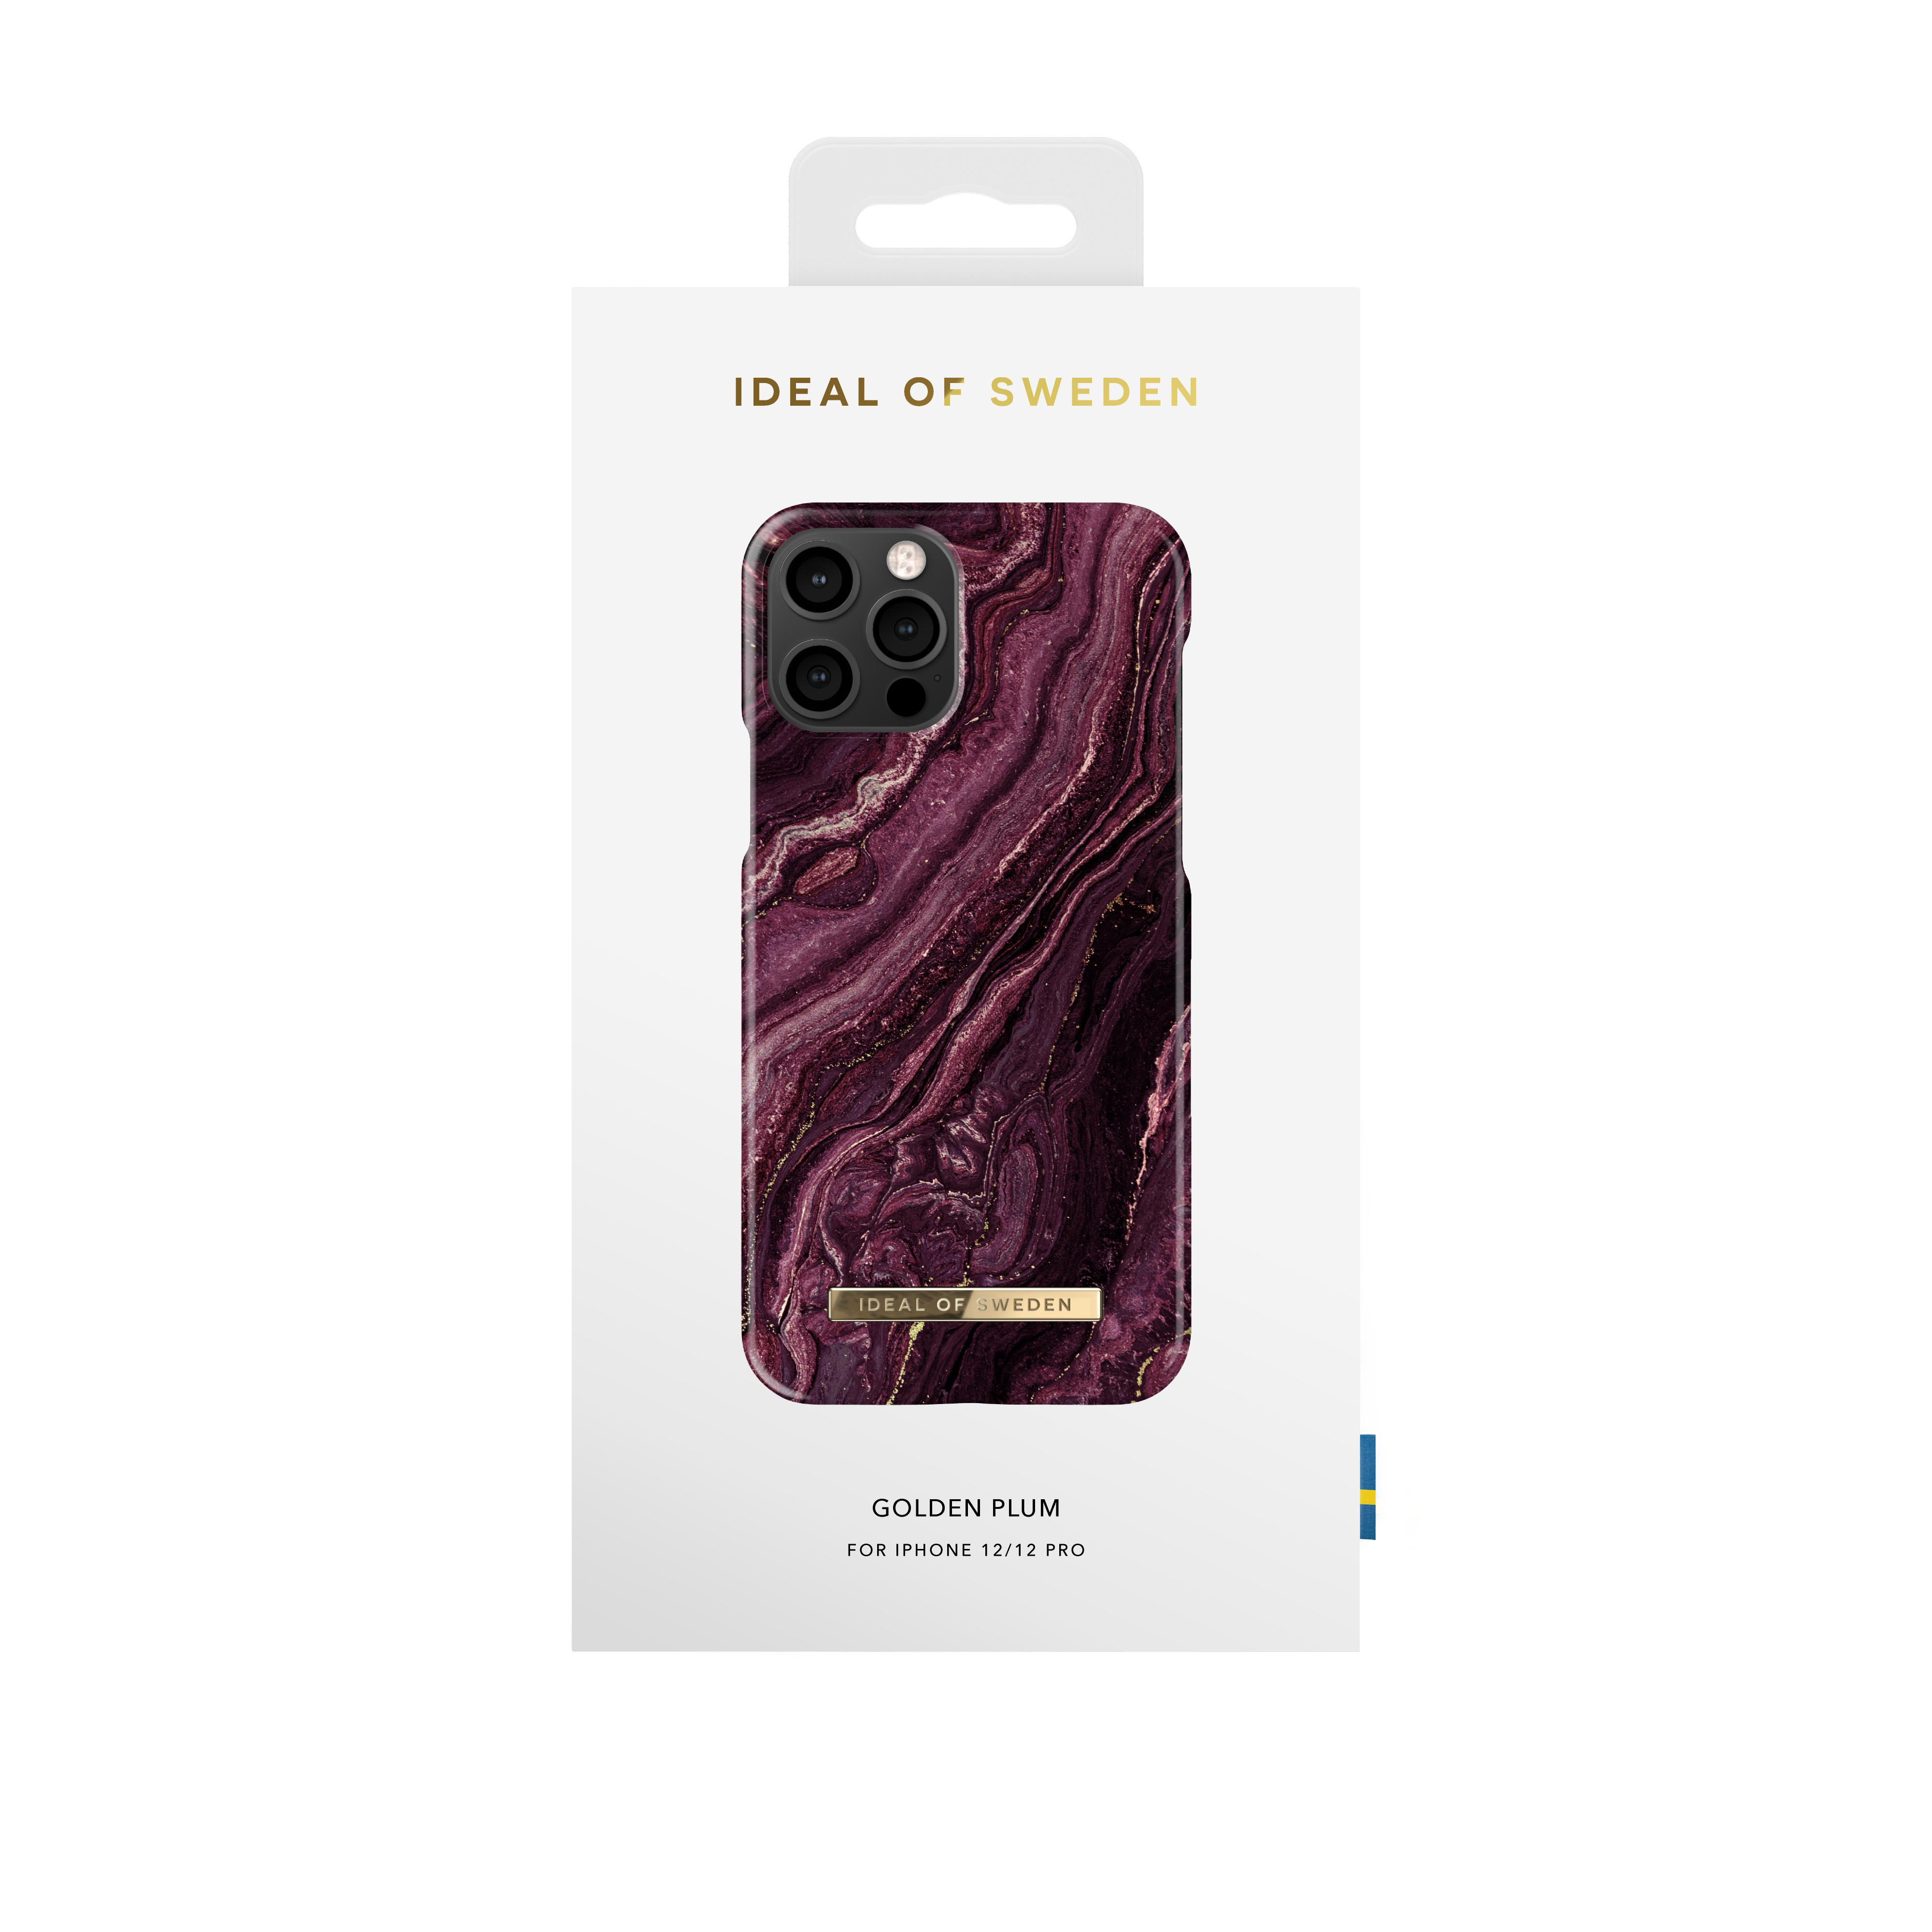 IDEAL OF SWEDEN Fashion, 12, Pro, Backcover, Purple iPhone iPhone 12 Apple